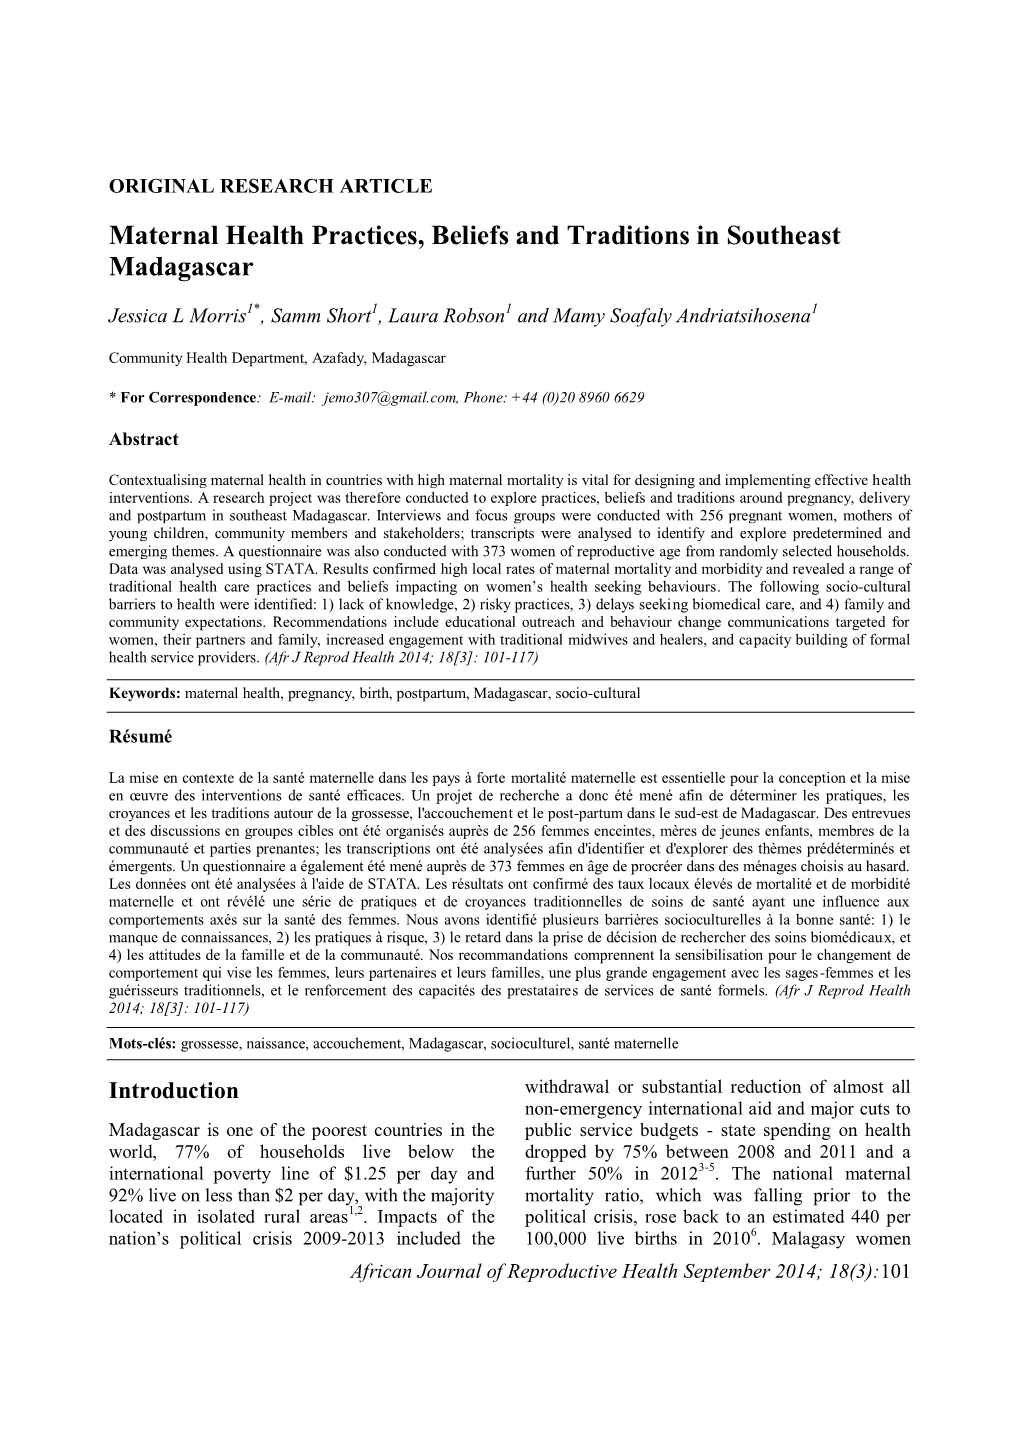 Maternal Health Practices, Beliefs and Traditions in Southeast Madagascar